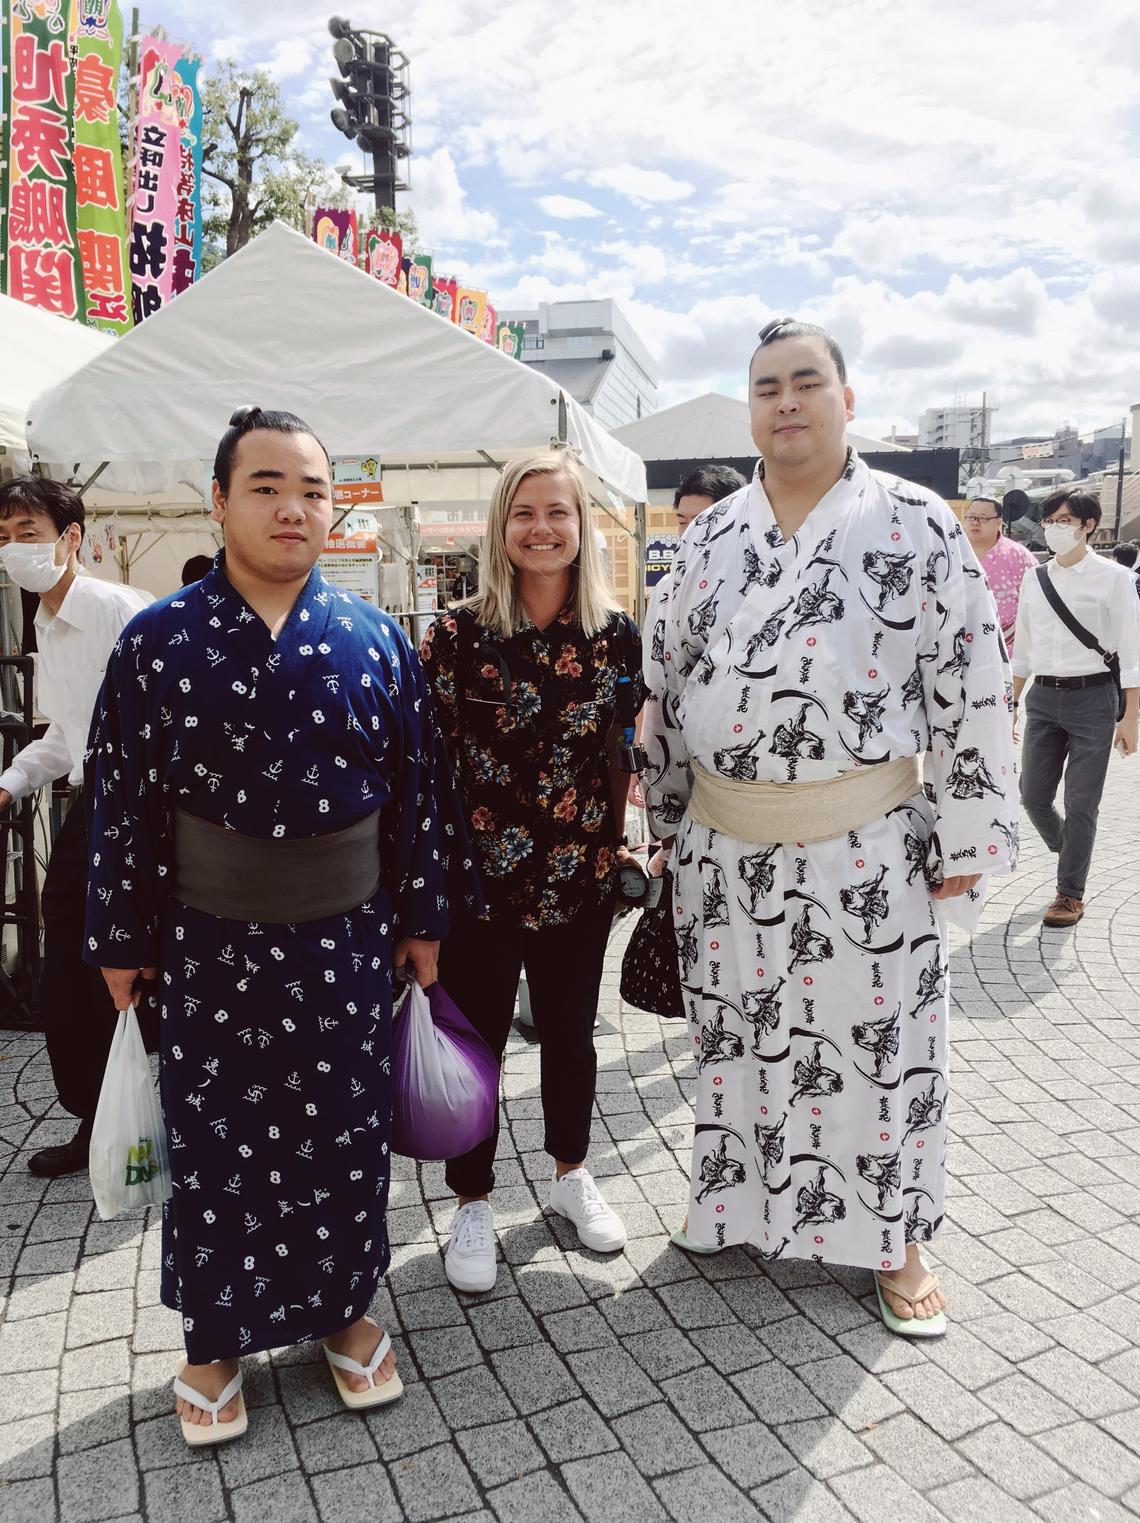 University of Calgary School of Architecture, Planning and Landscape master's grad Ashley Ortlieb says her study abroad experience in Tokyo was amazing.